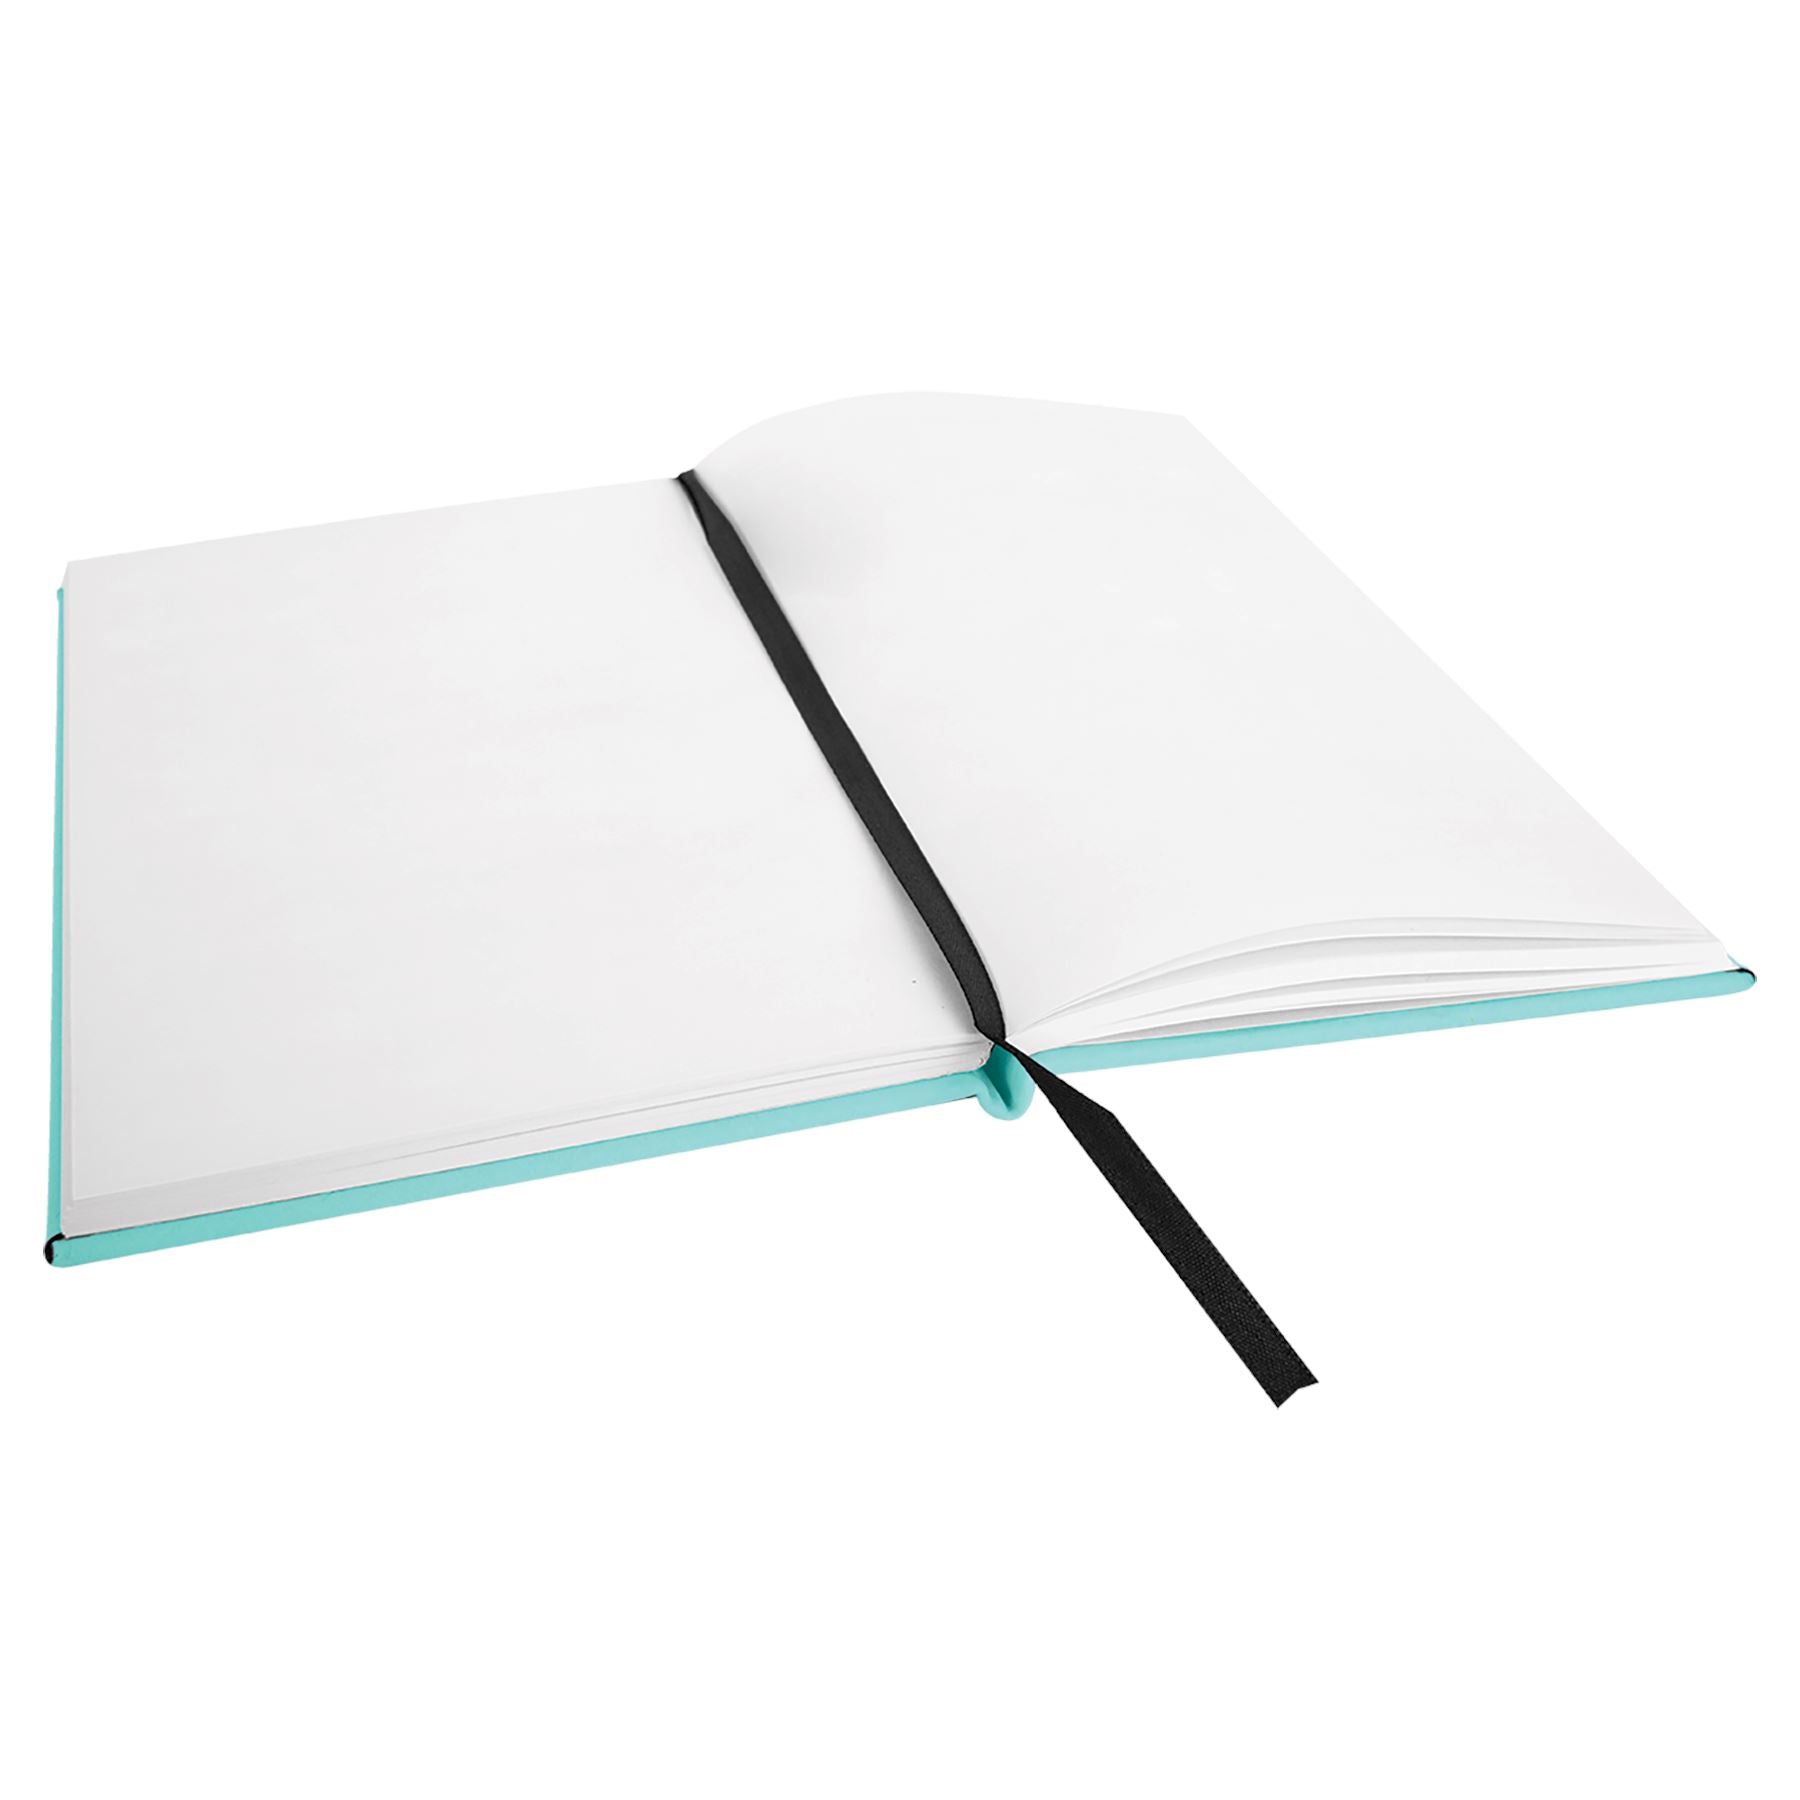 Sketch Book-Unlined Paper, 5 1/4" x 8 1/4" Laserable Leatherette, Laser Engraved Sketch Book Craftworks NW 